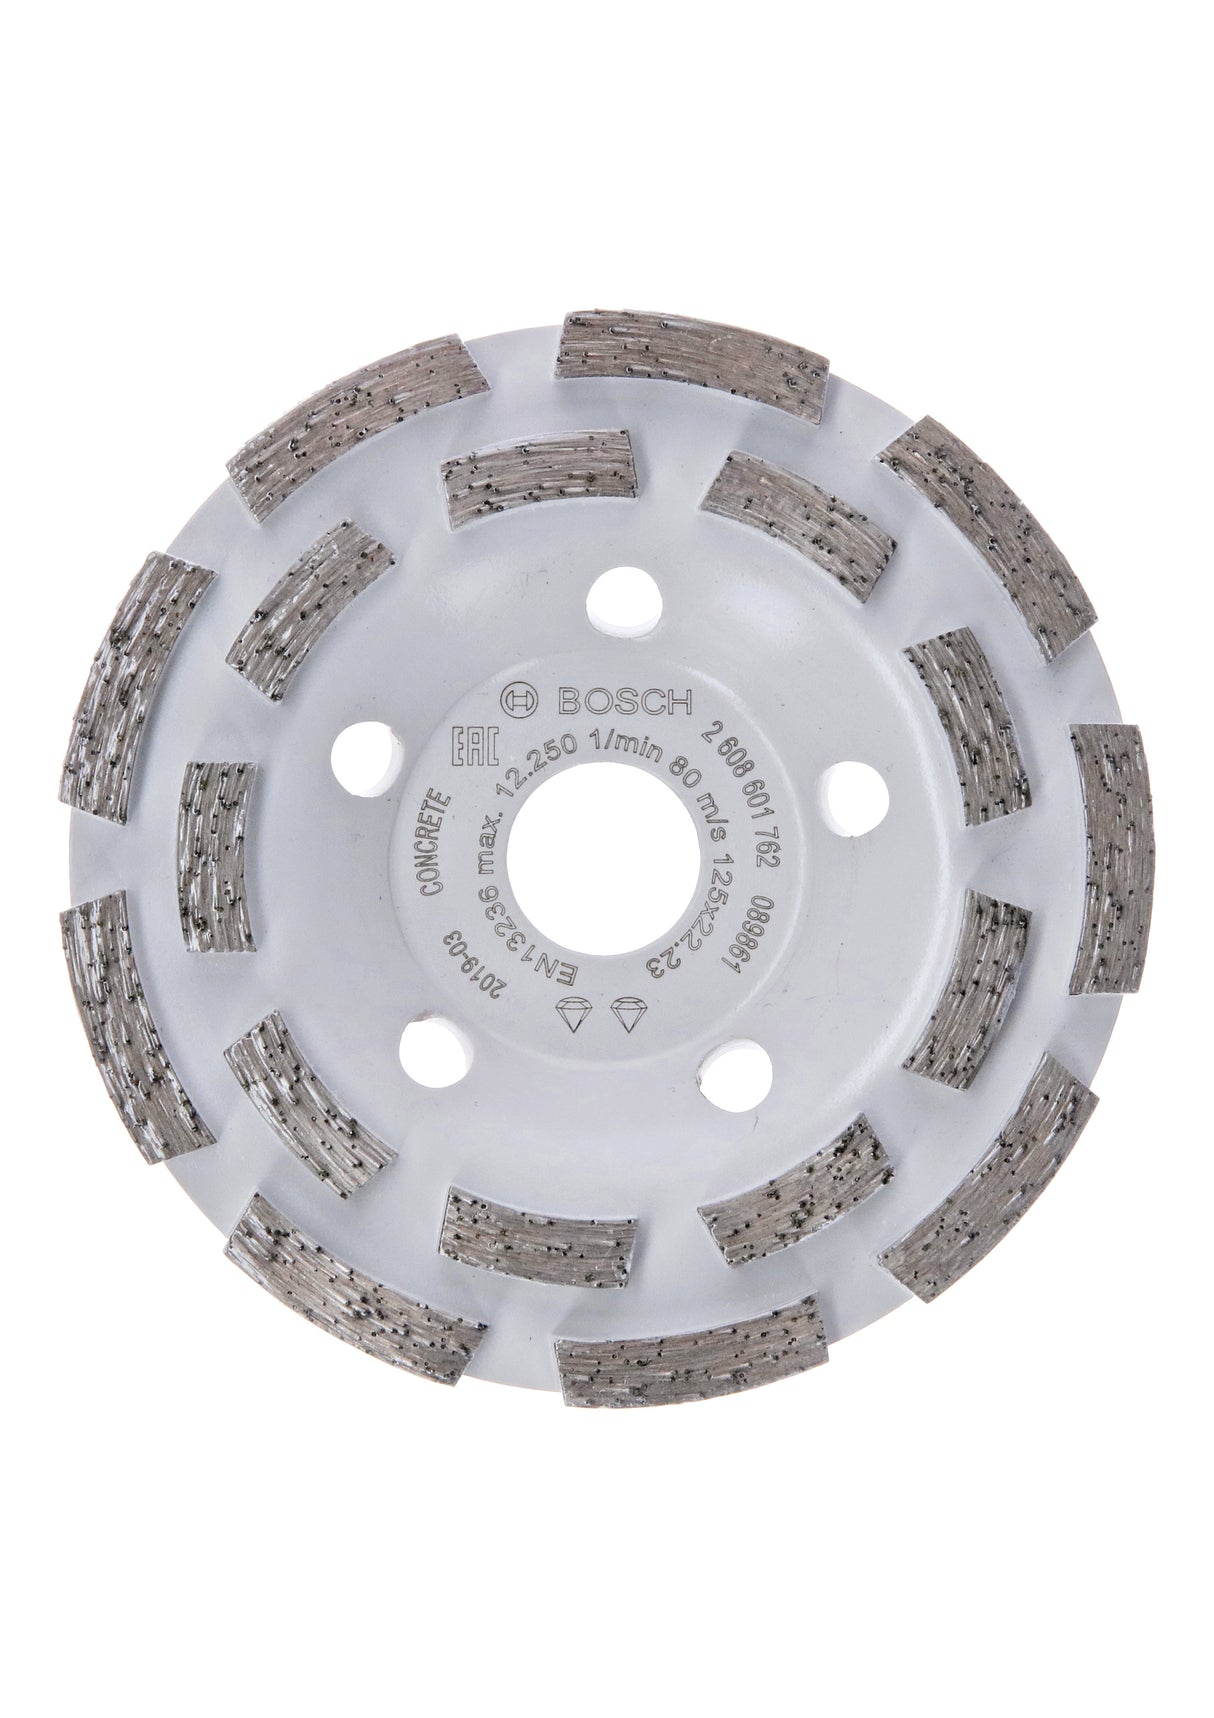 Bosch Professional Double Row Diamond Grinding Head for Concrete - Long Life, 125 x 22.23 x 5 mm